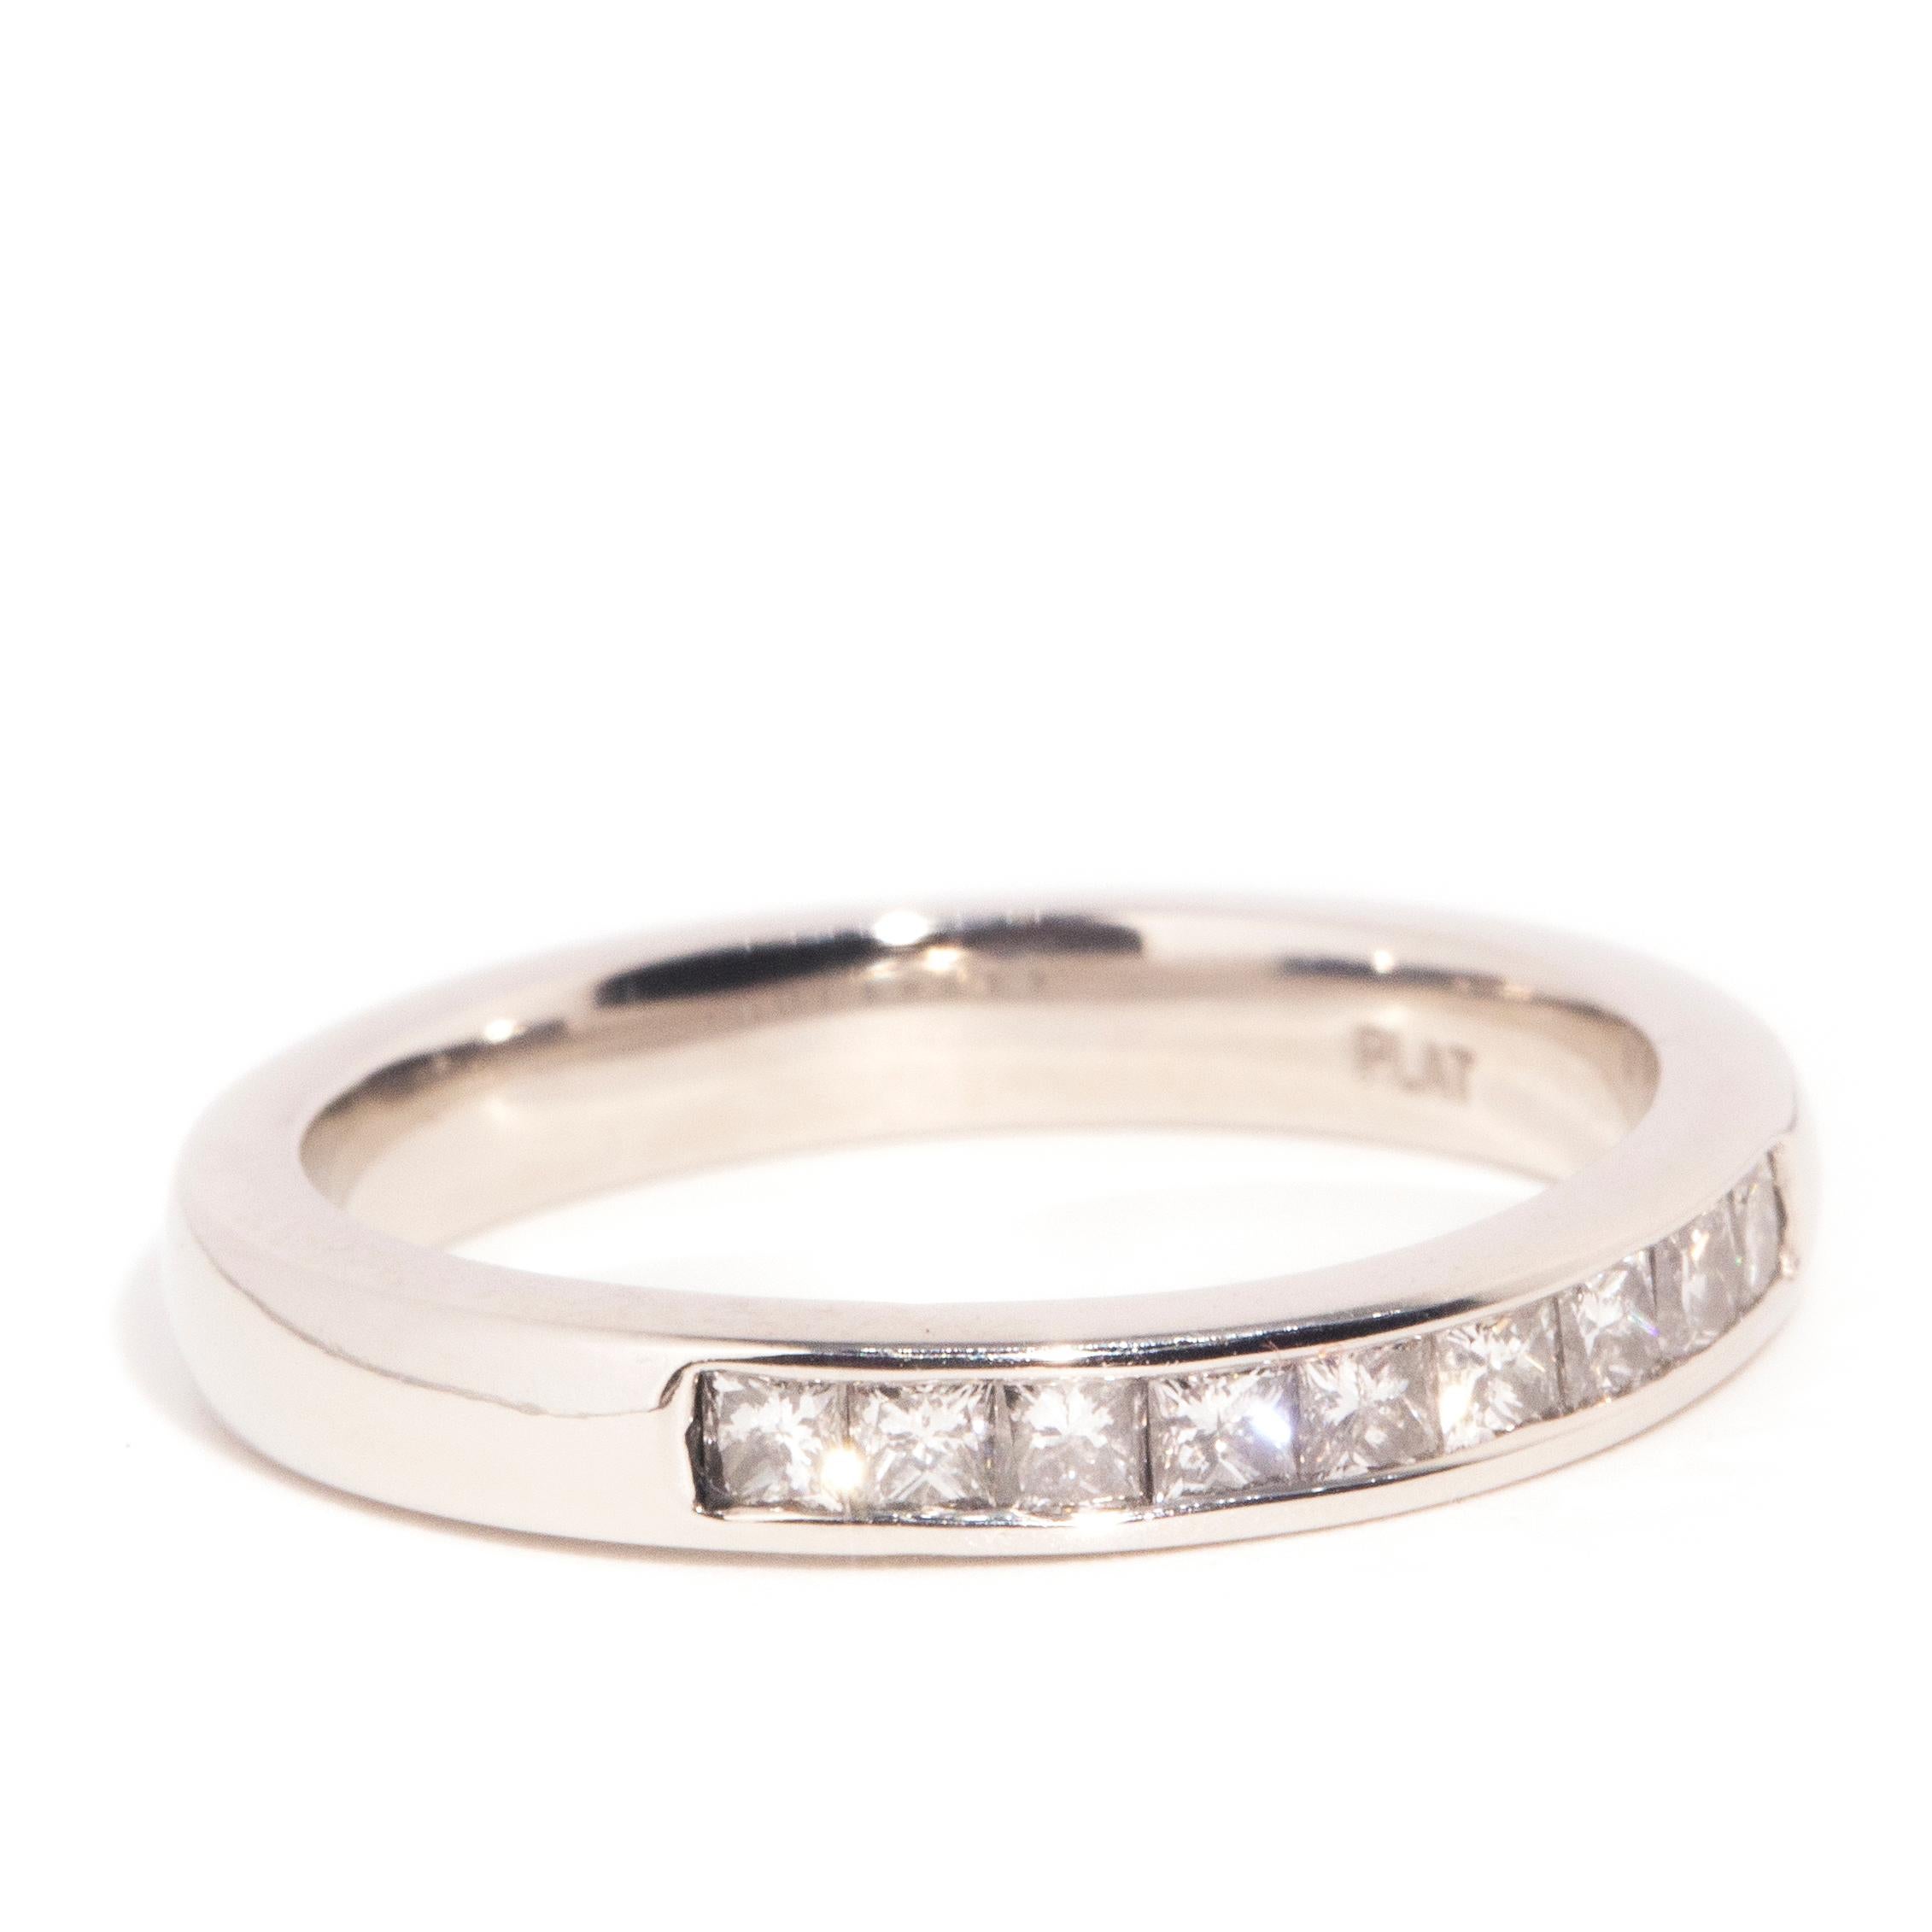 Contemporary Channel Set Princess Cut Diamond Platinum Eternity Band Ring In Good Condition For Sale In Hamilton, AU